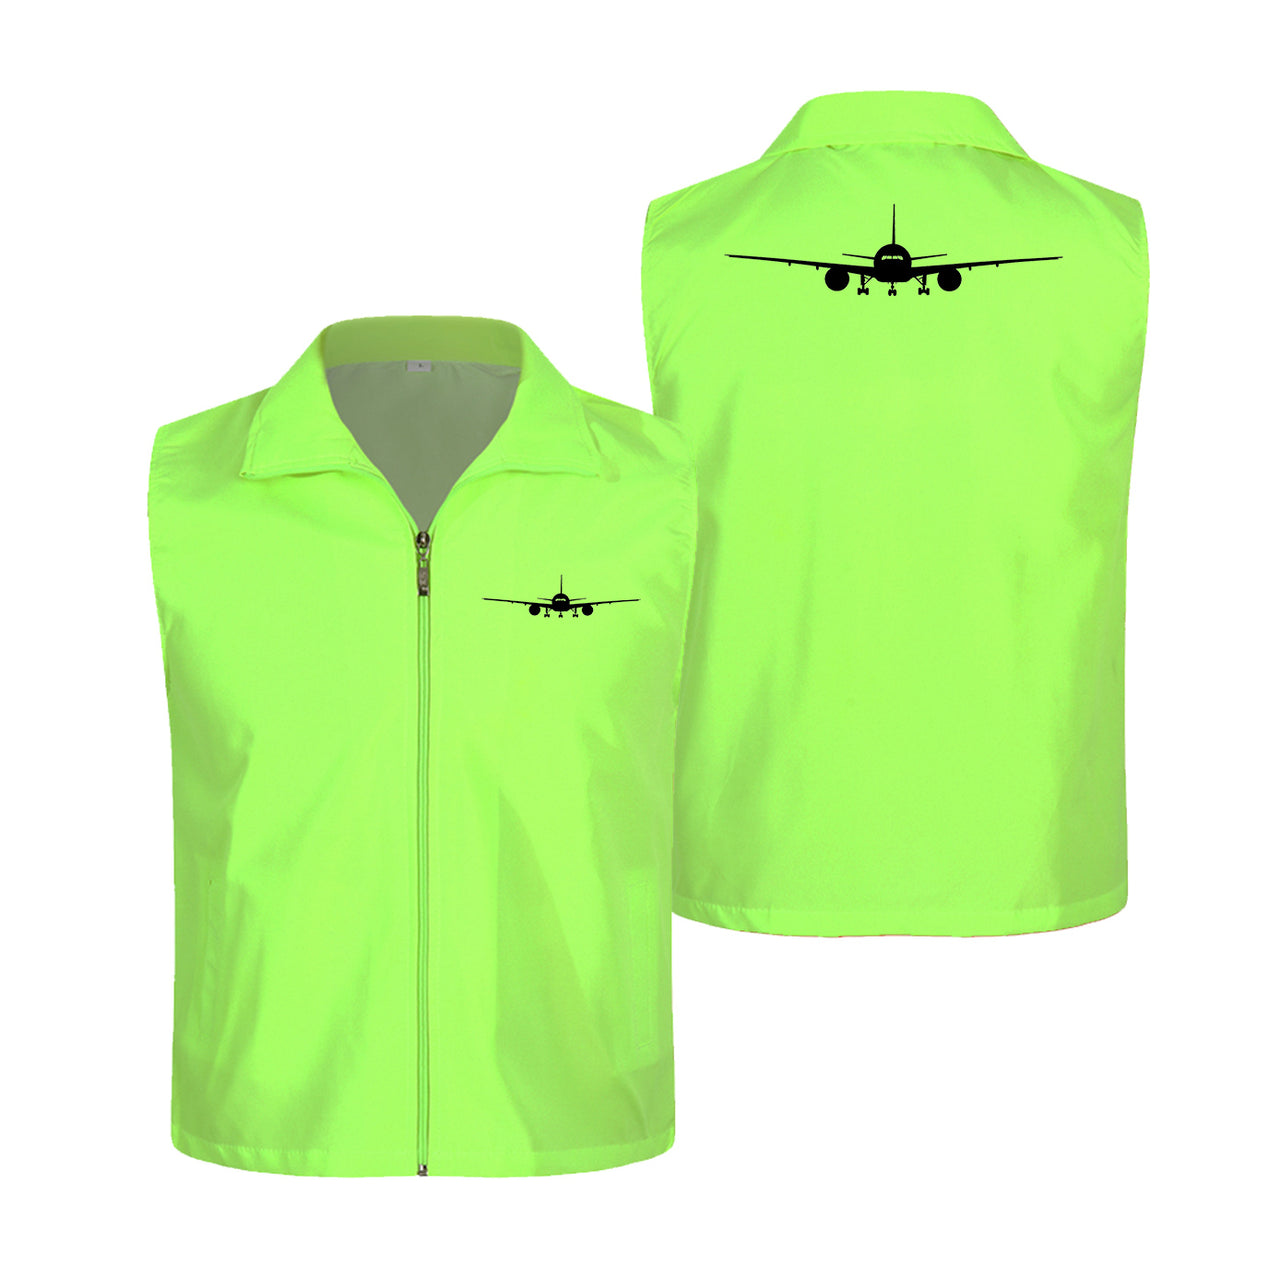 Boeing 777 Silhouette Designed Thin Style Vests